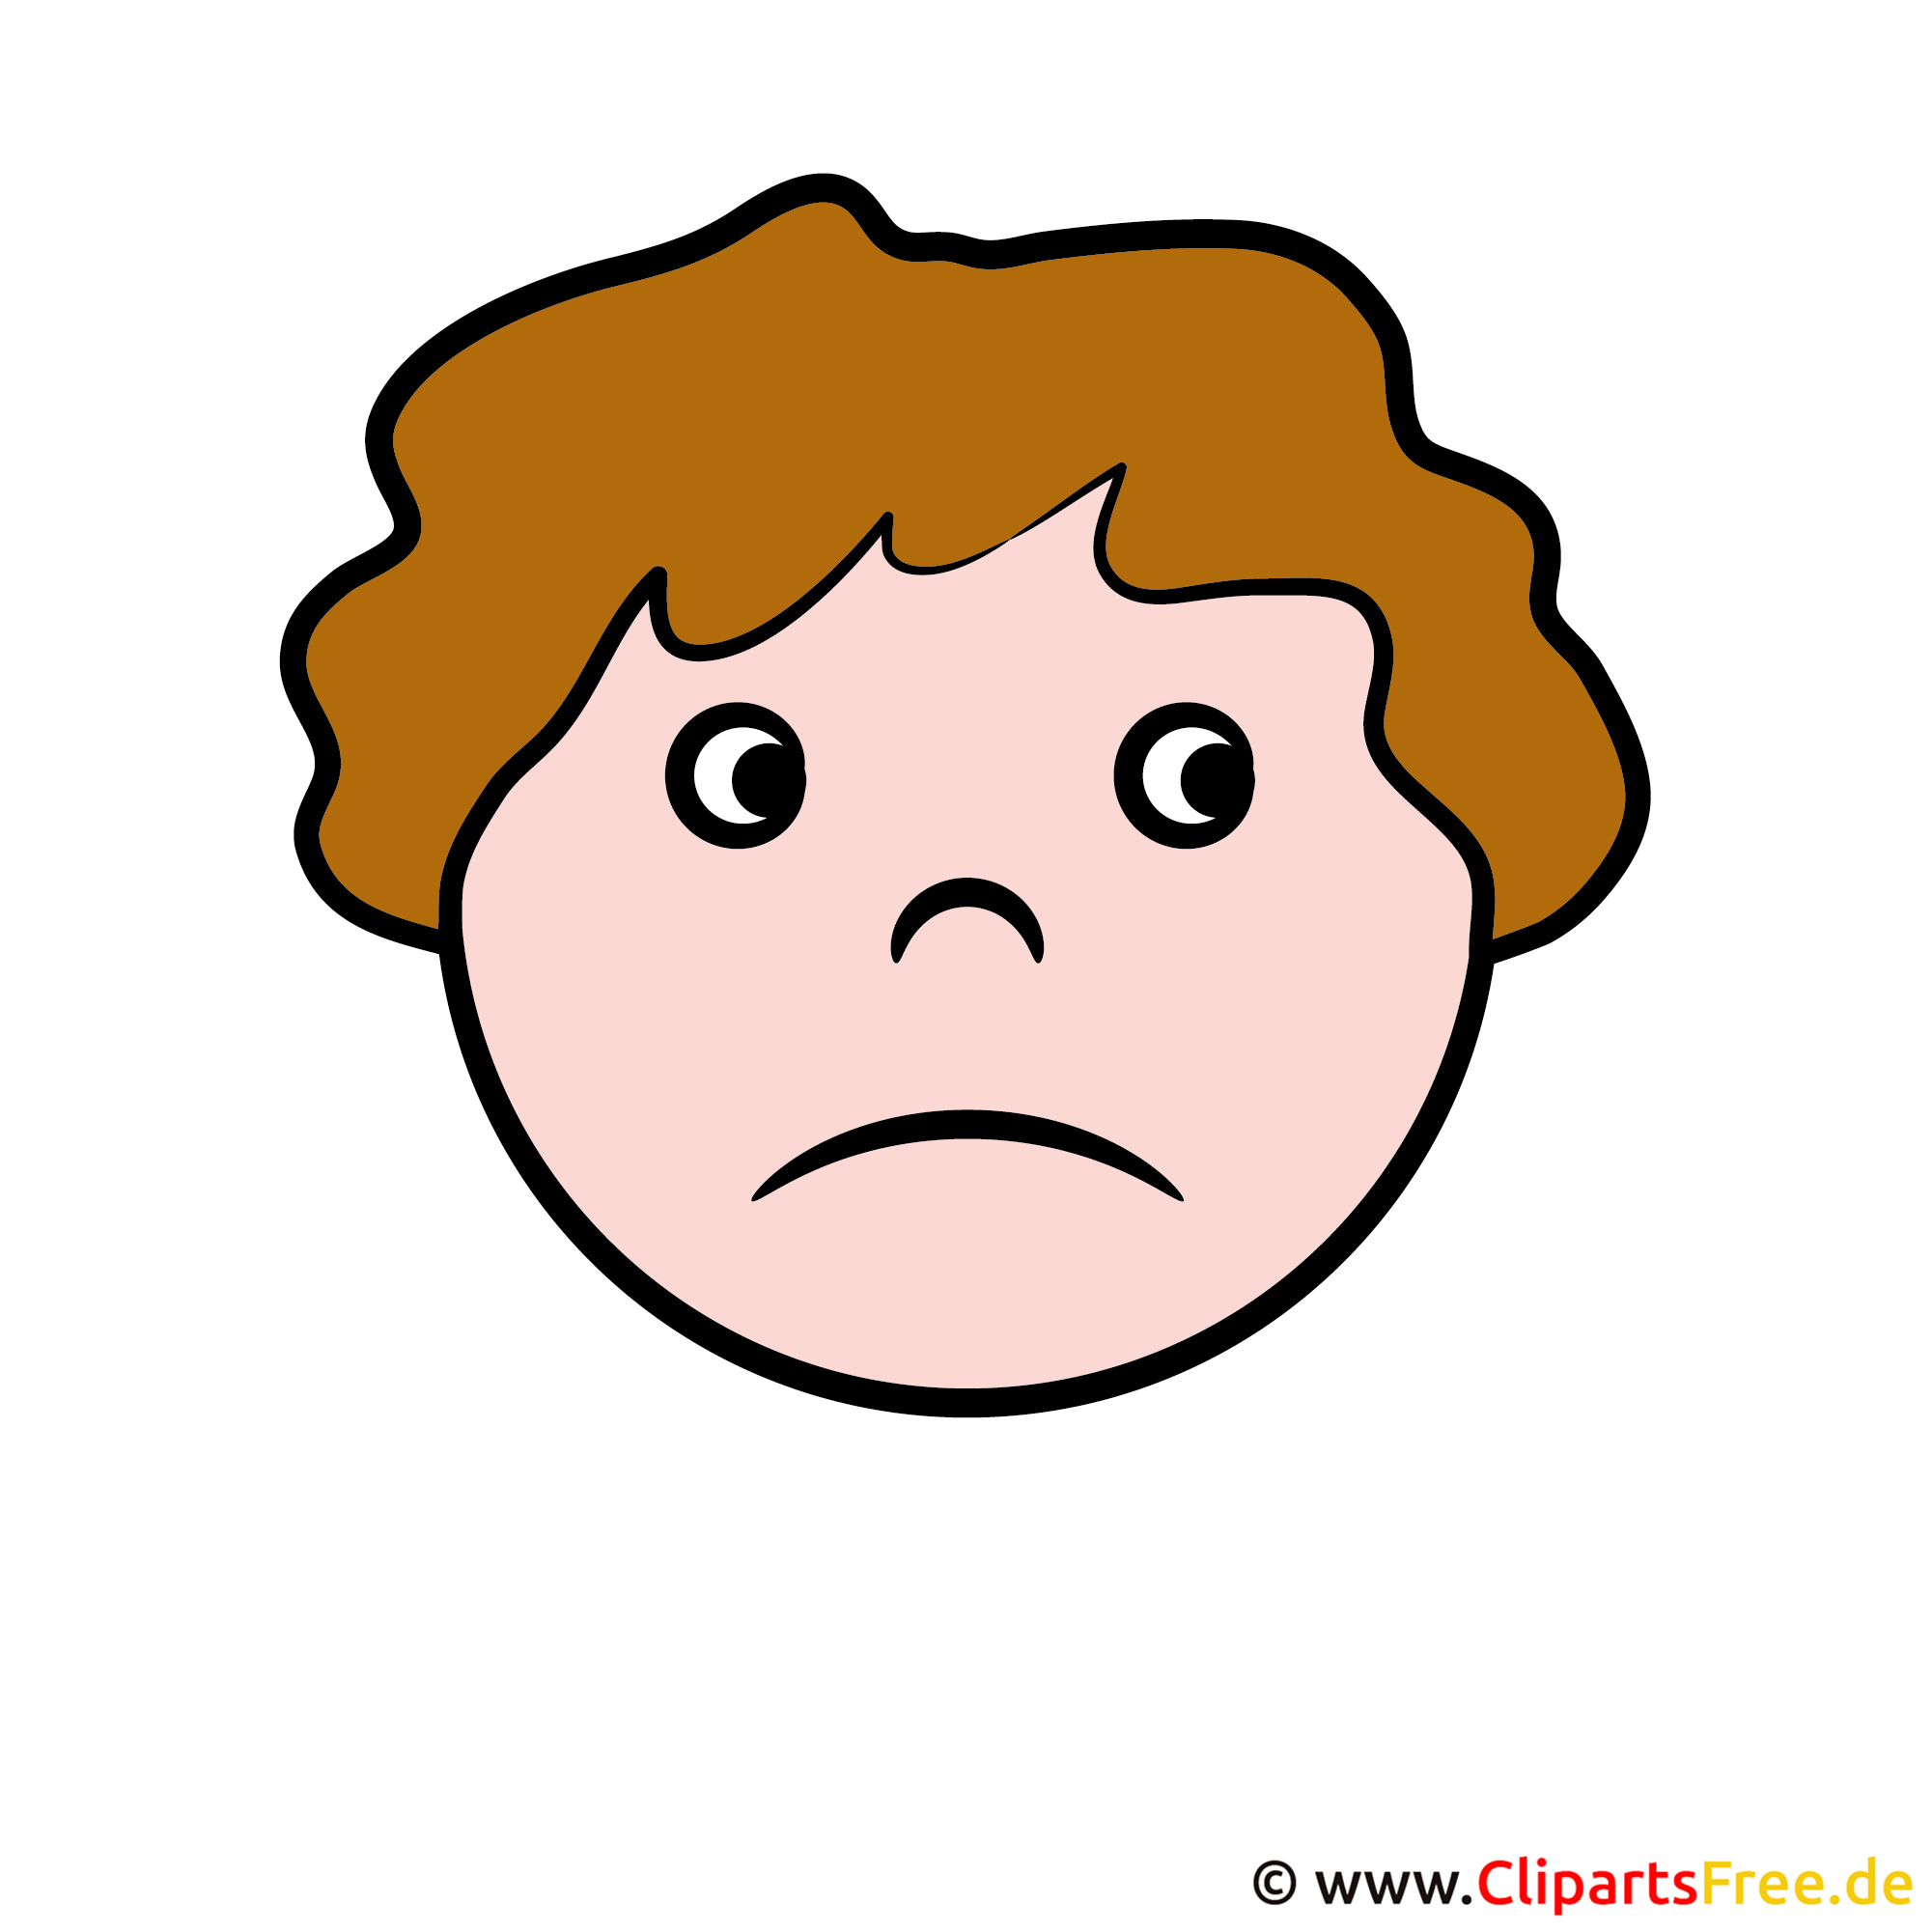 clipart smiley traurig - photo #6